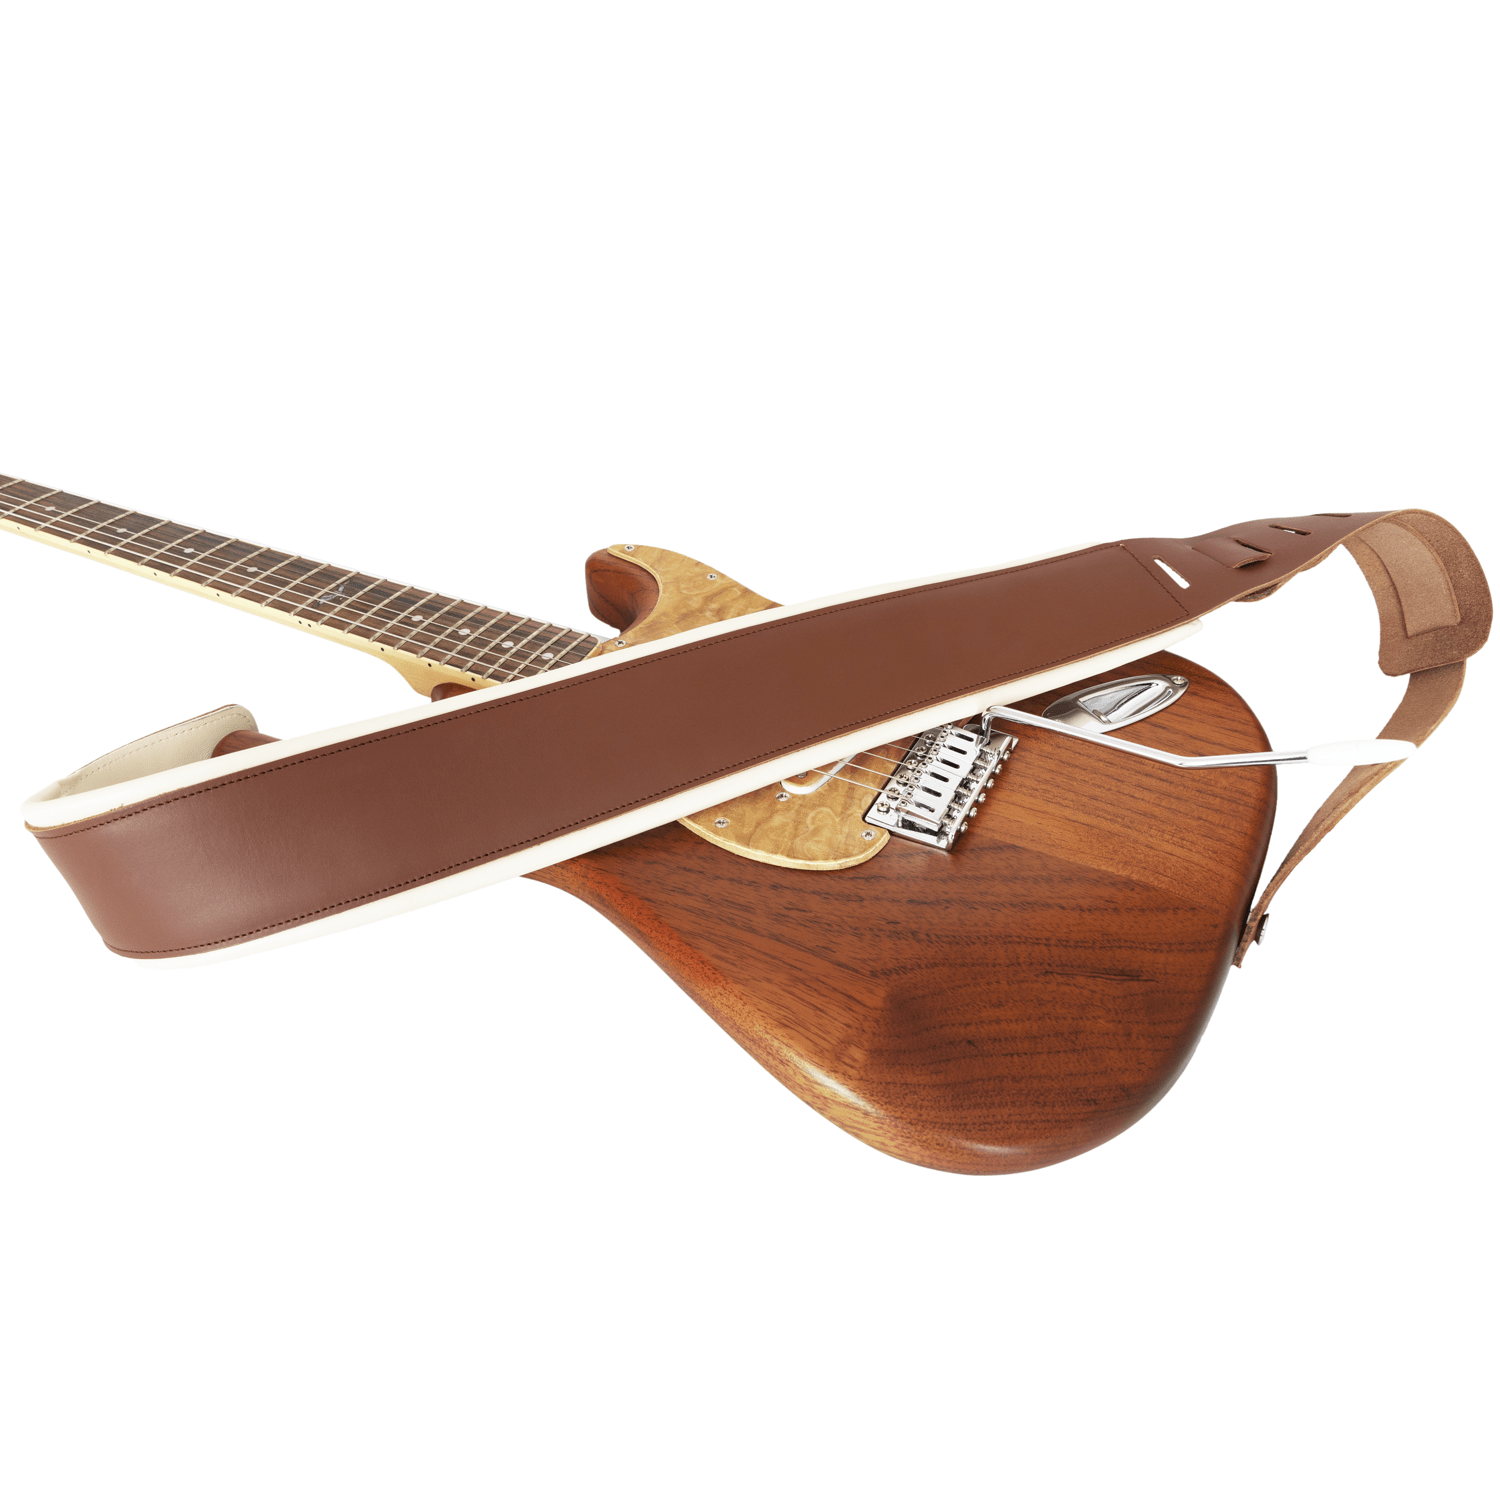 Padded Two-tone Leather Guitar Strap